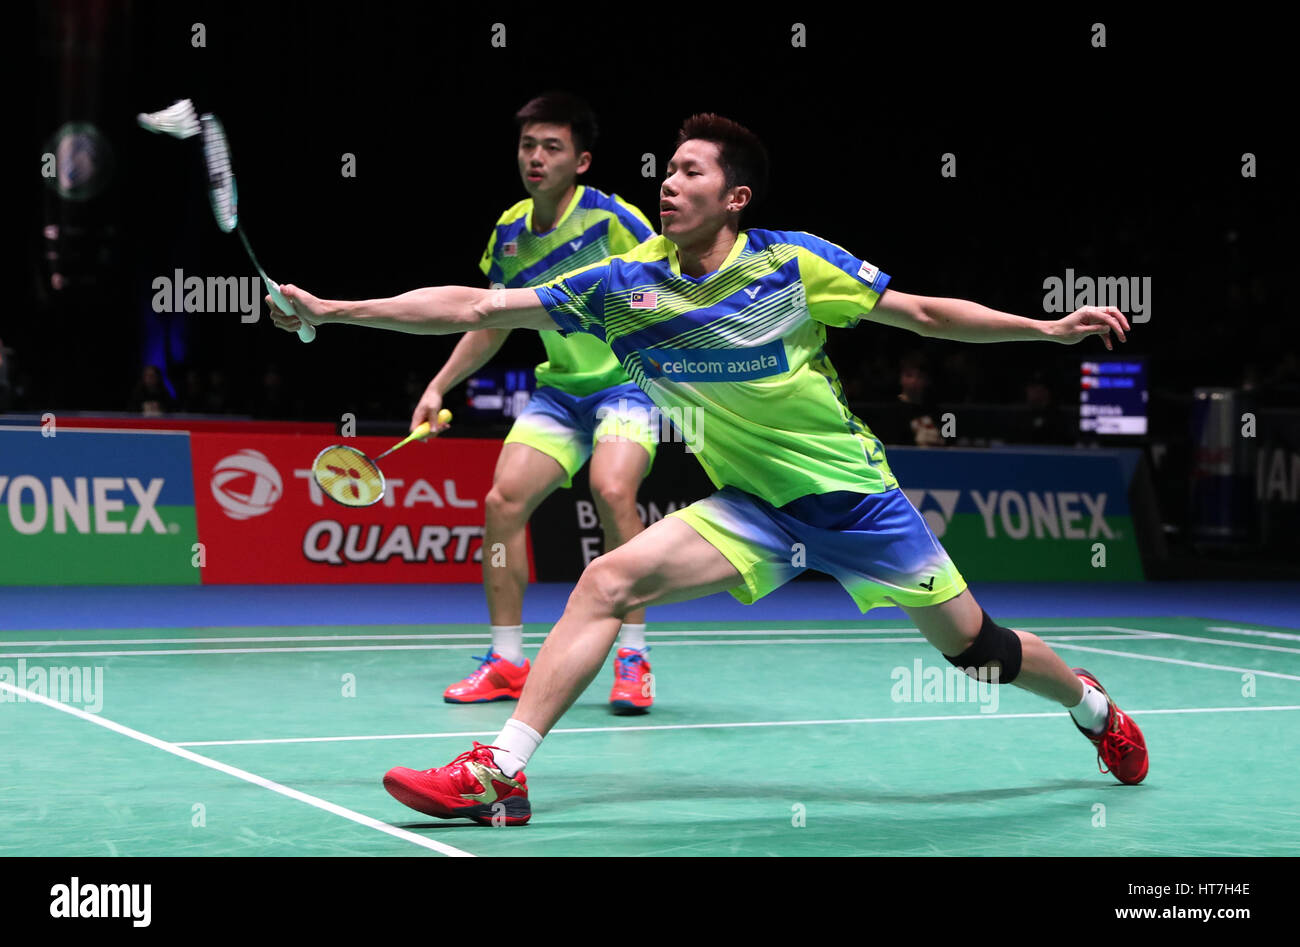 Malaysia's V Shem Goh (back) and Wee Kiong Tan in action during the Men's doubles match during day two of the YONEX All England Open Badminton Championships at the Barclaycard Arena, Birmingham. Stock Photo